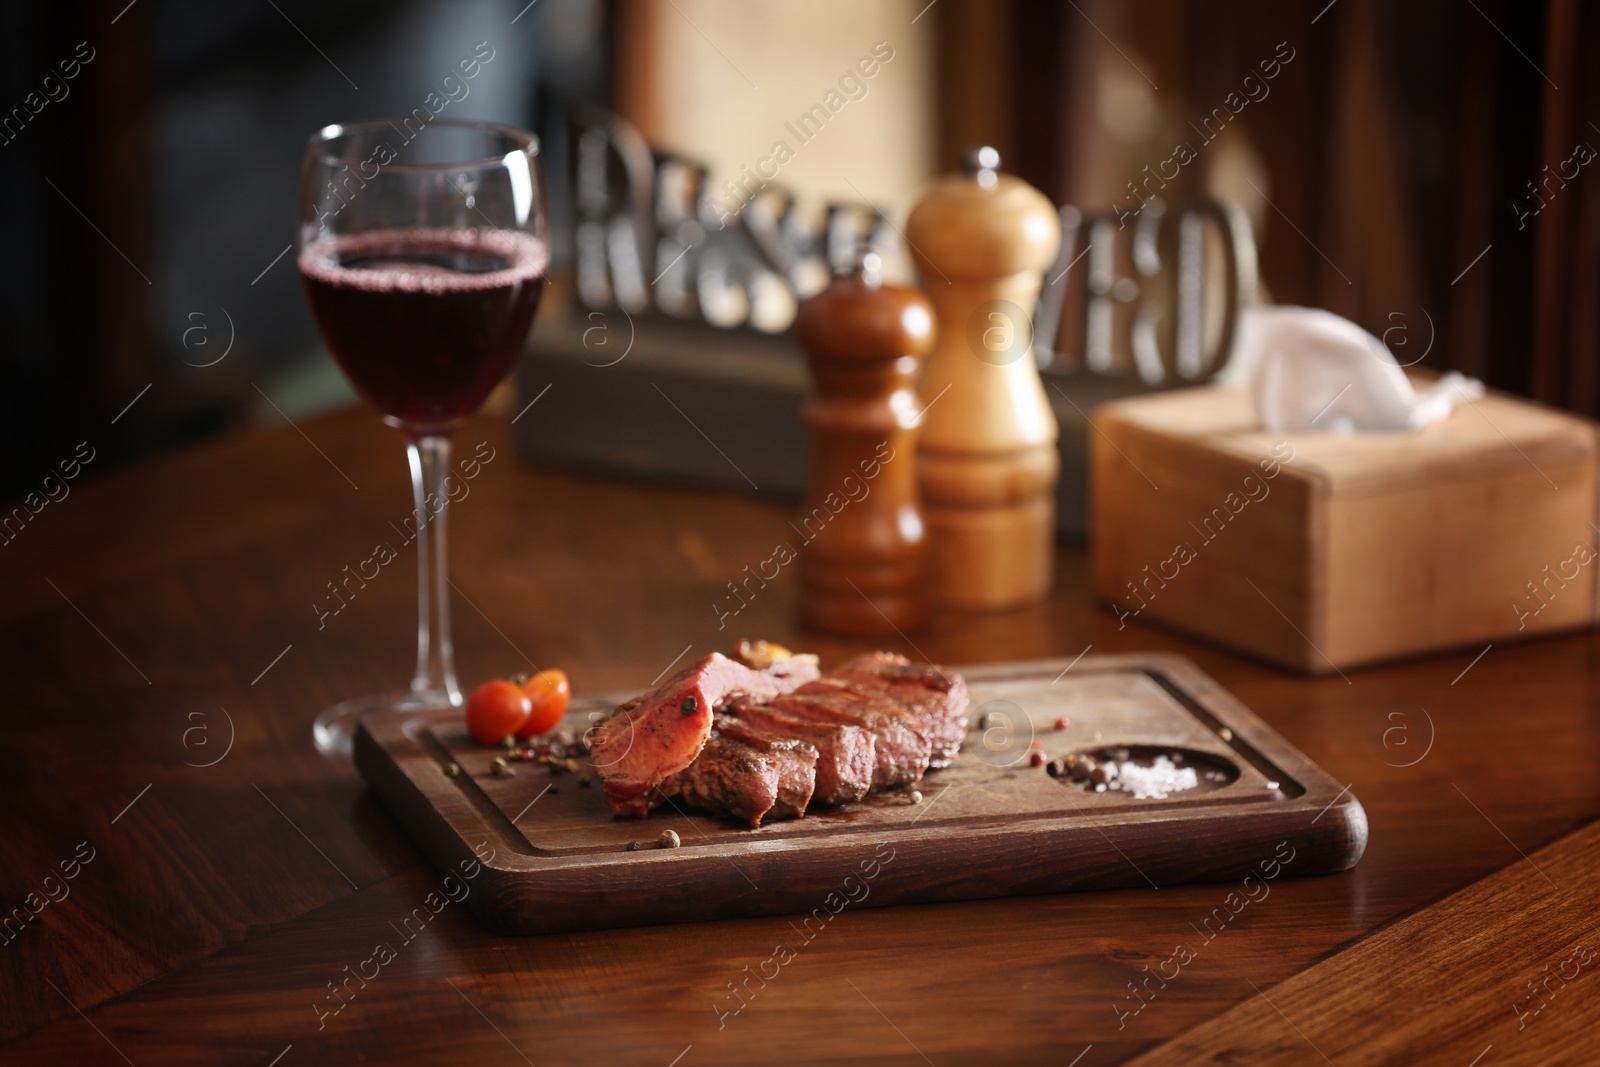 Photo of Tasty roasted meat served on wooden table in restaurant. Cooking food